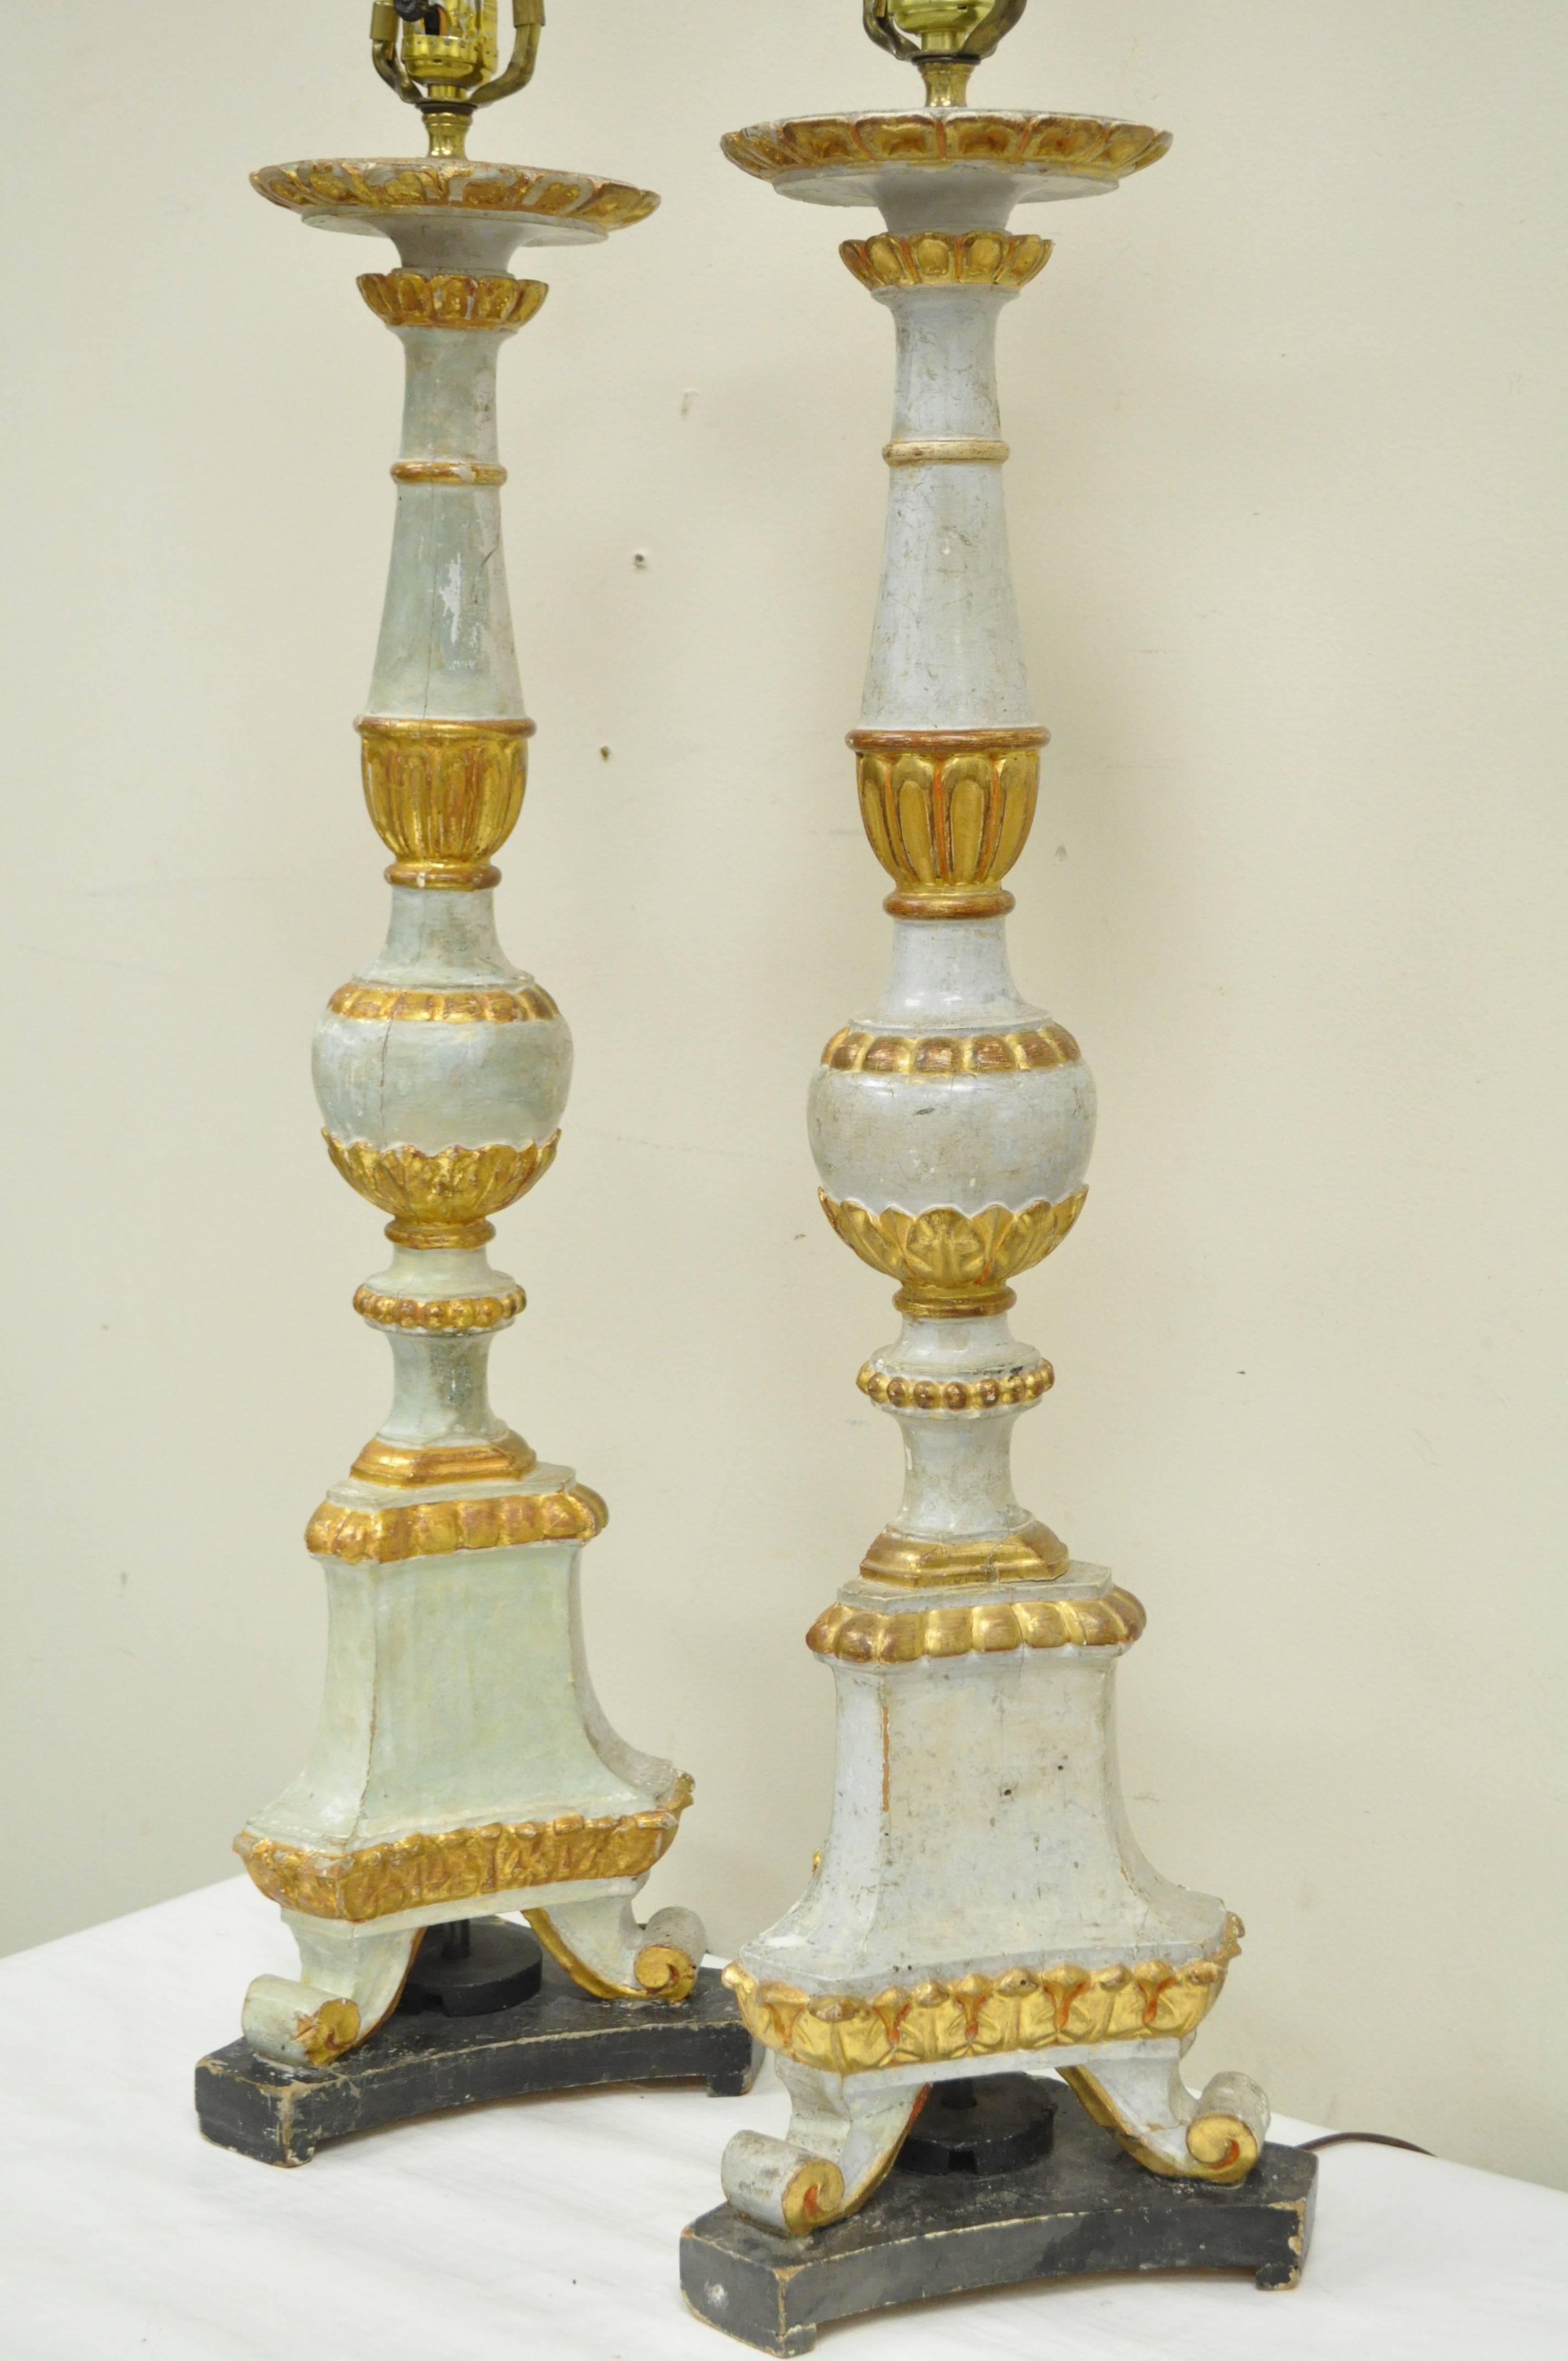 Pair of early 20th century Italian hand-carved solid wood parcel-gilt neoclassical style table lamps. Original Italian label found on the top of the lamps. Lamps have remarkable old world character with signs of desirable age to the wood as